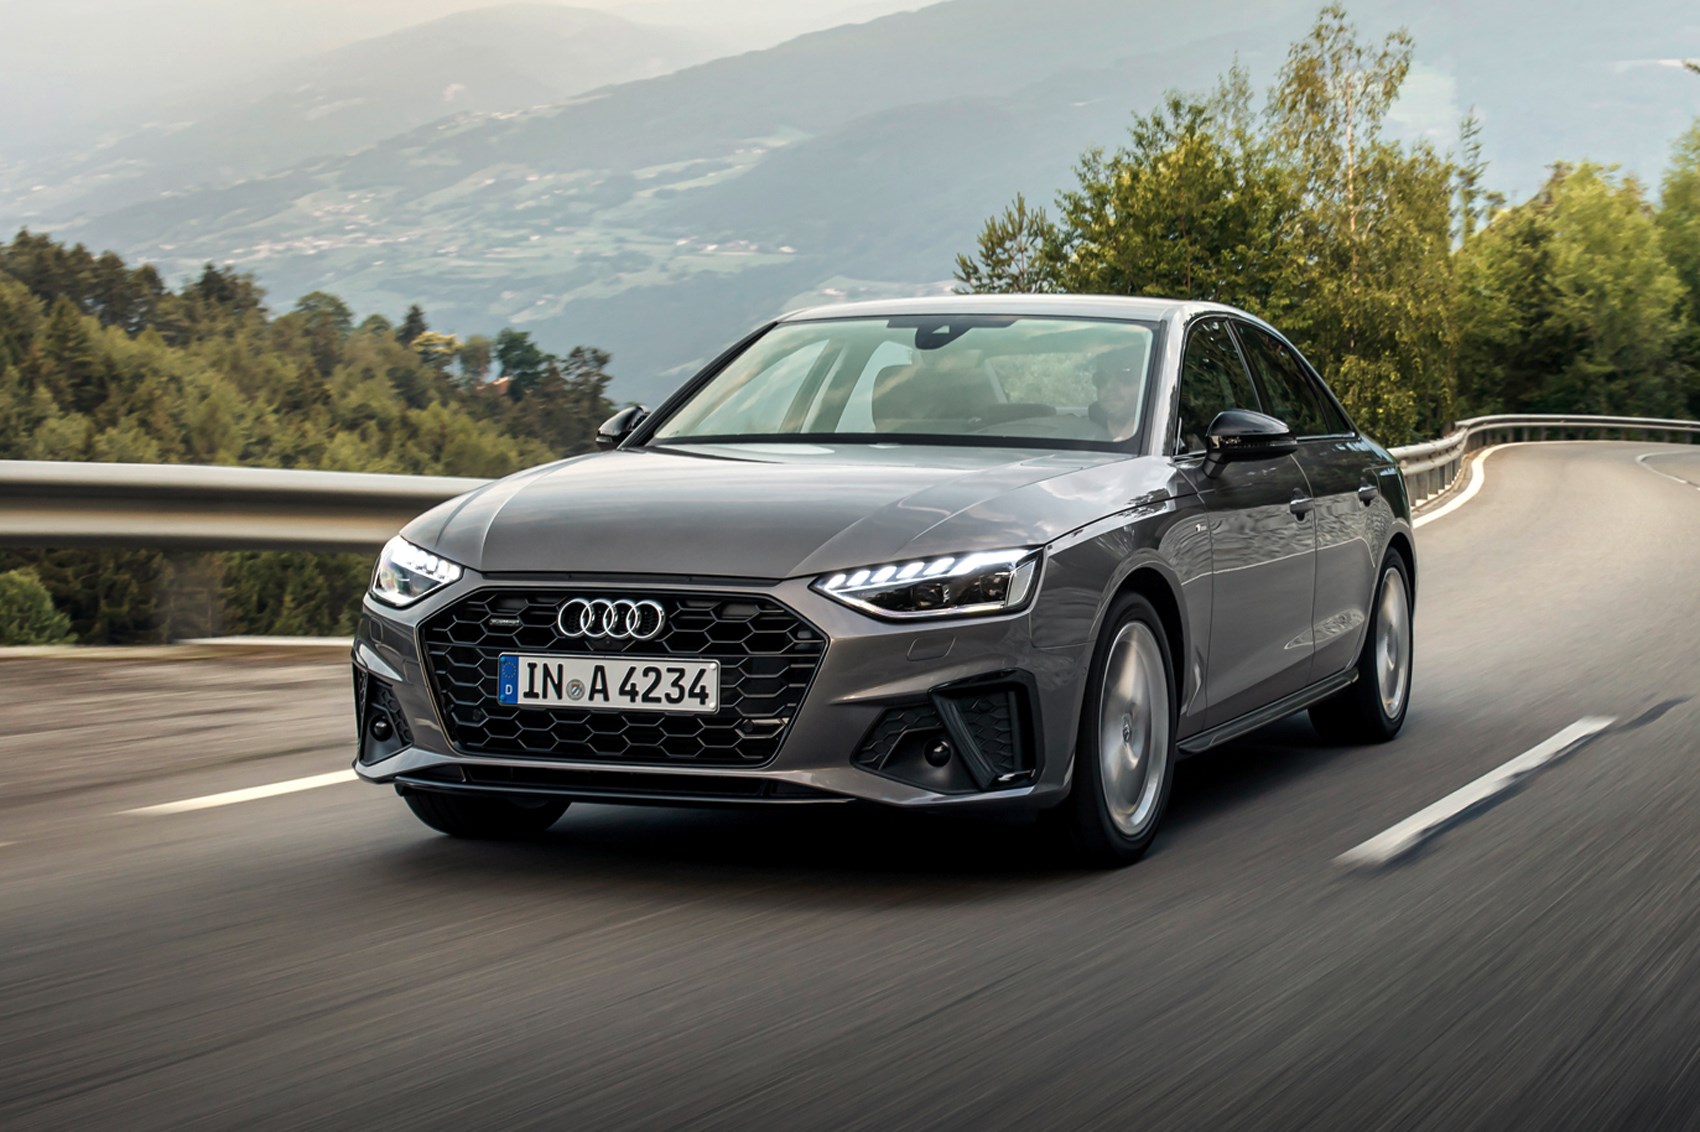 New Audi A4 Saloon Review (2020)